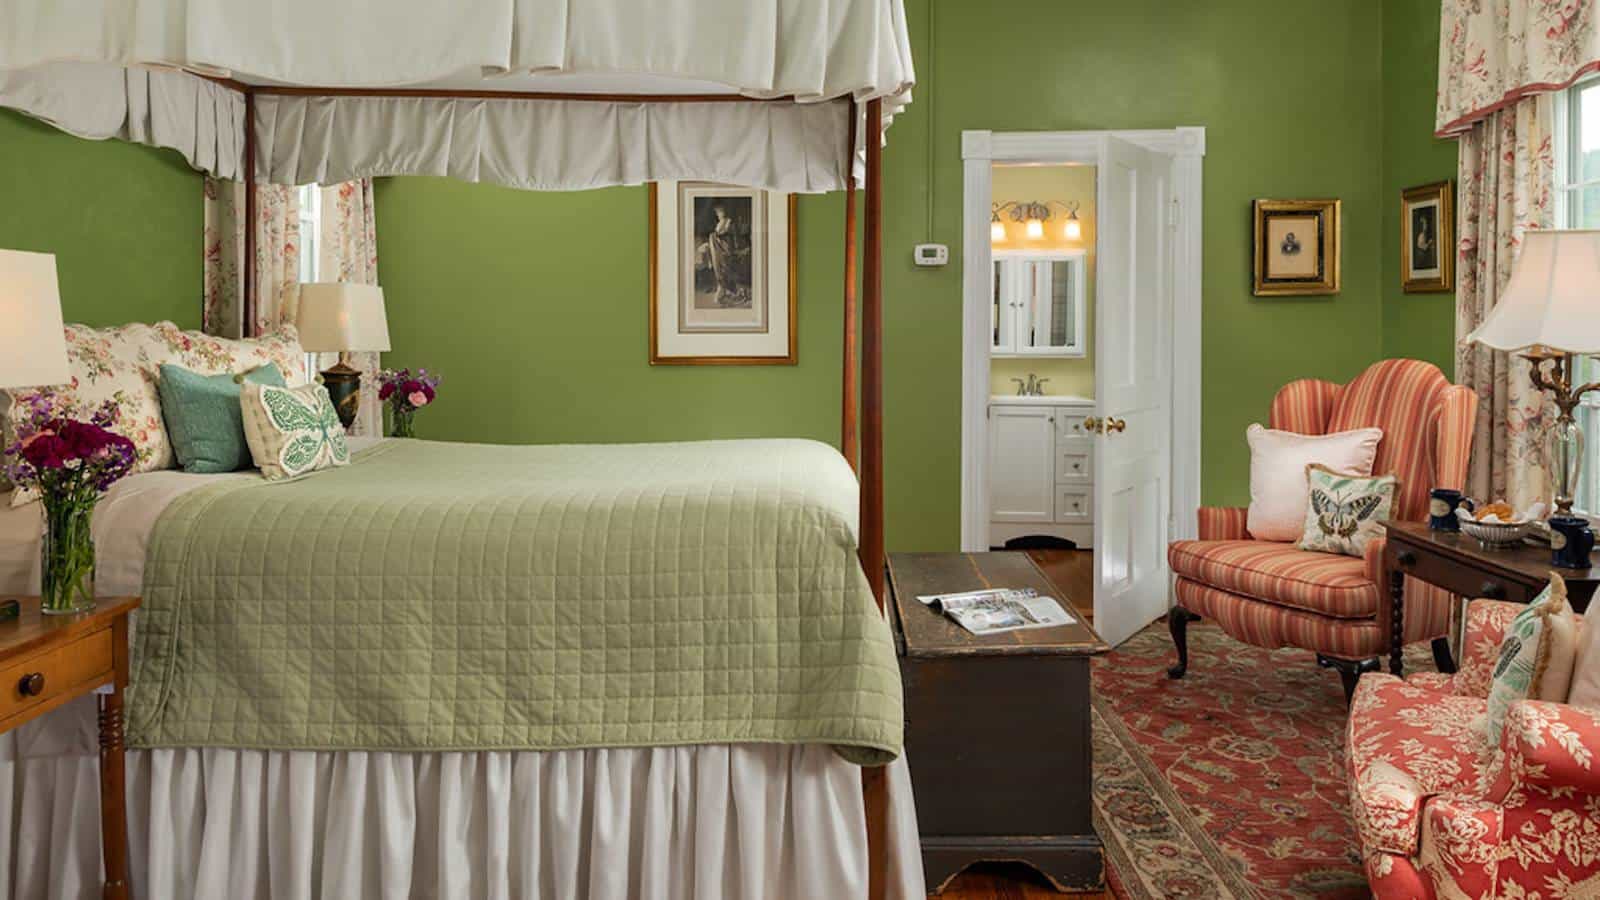 Bedroom with green walls, hardwood flooring, four poster bed with canopy and green blanket, and sitting area